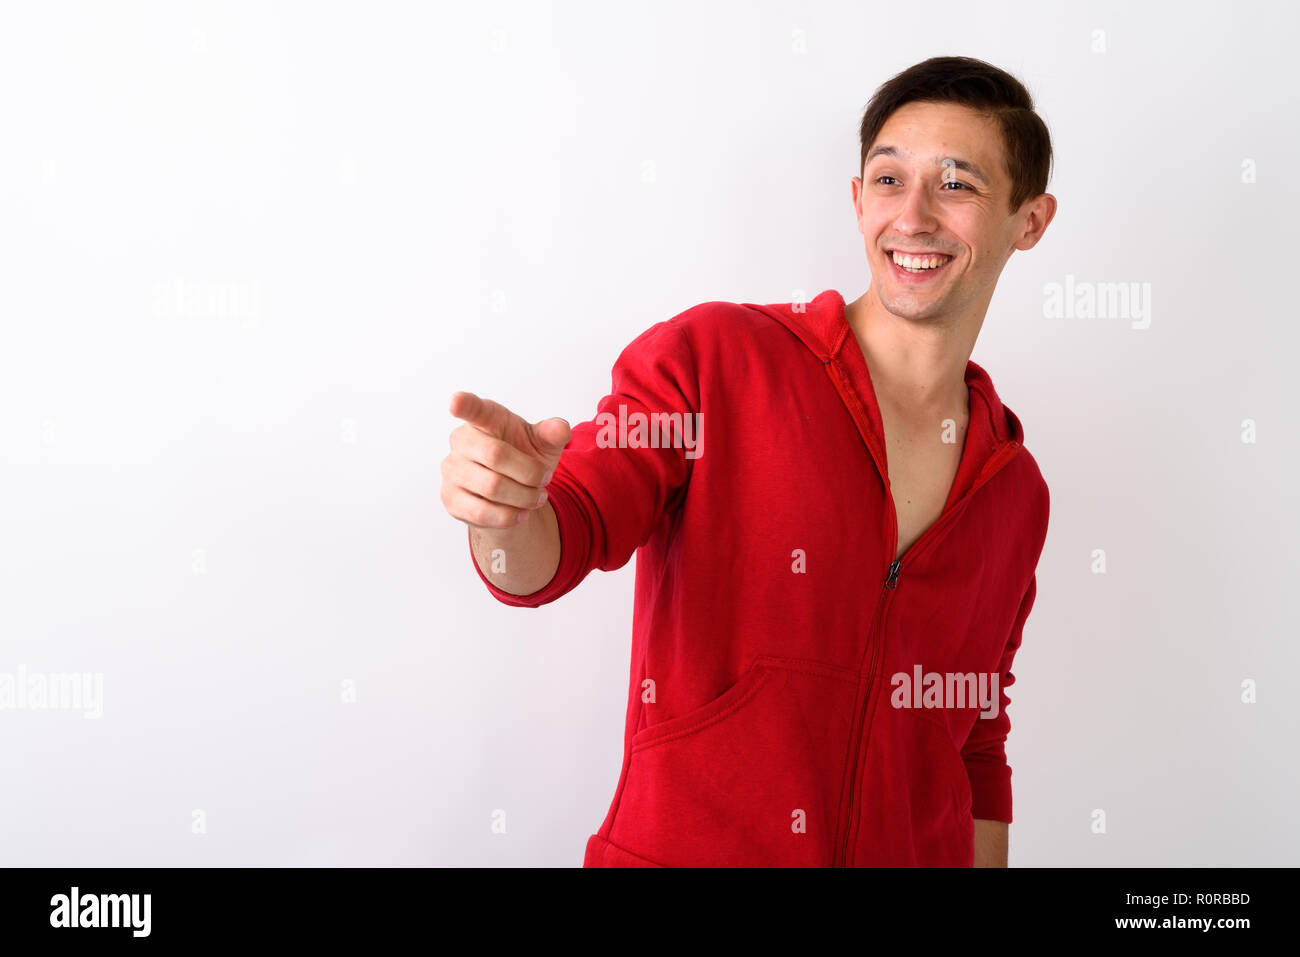 Studio shot of happy young handsome man smiling while pointing t Stock Photo